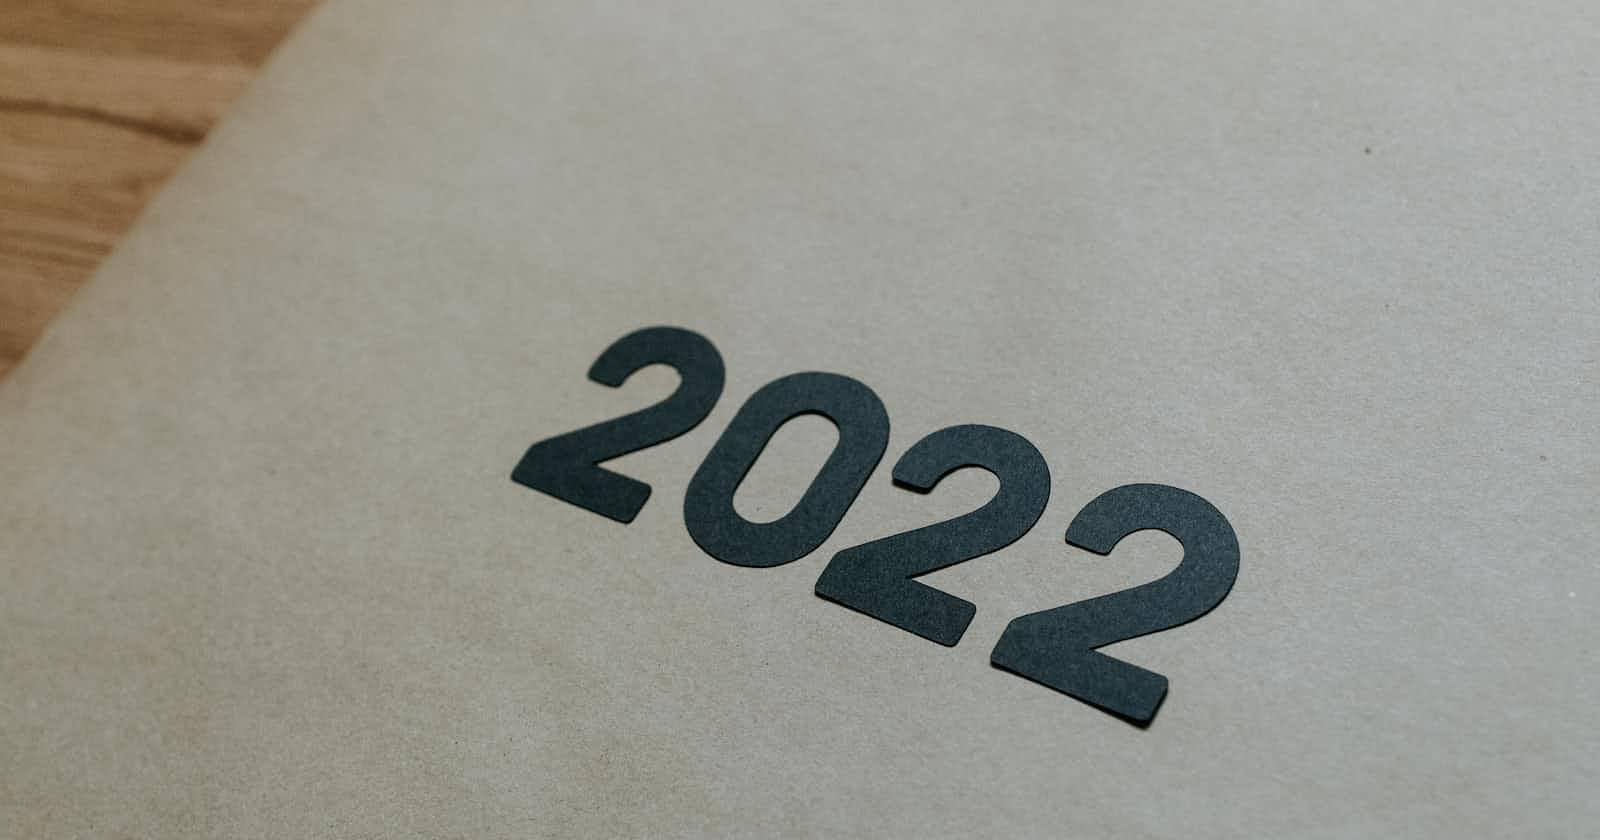 From 2021 to 2022